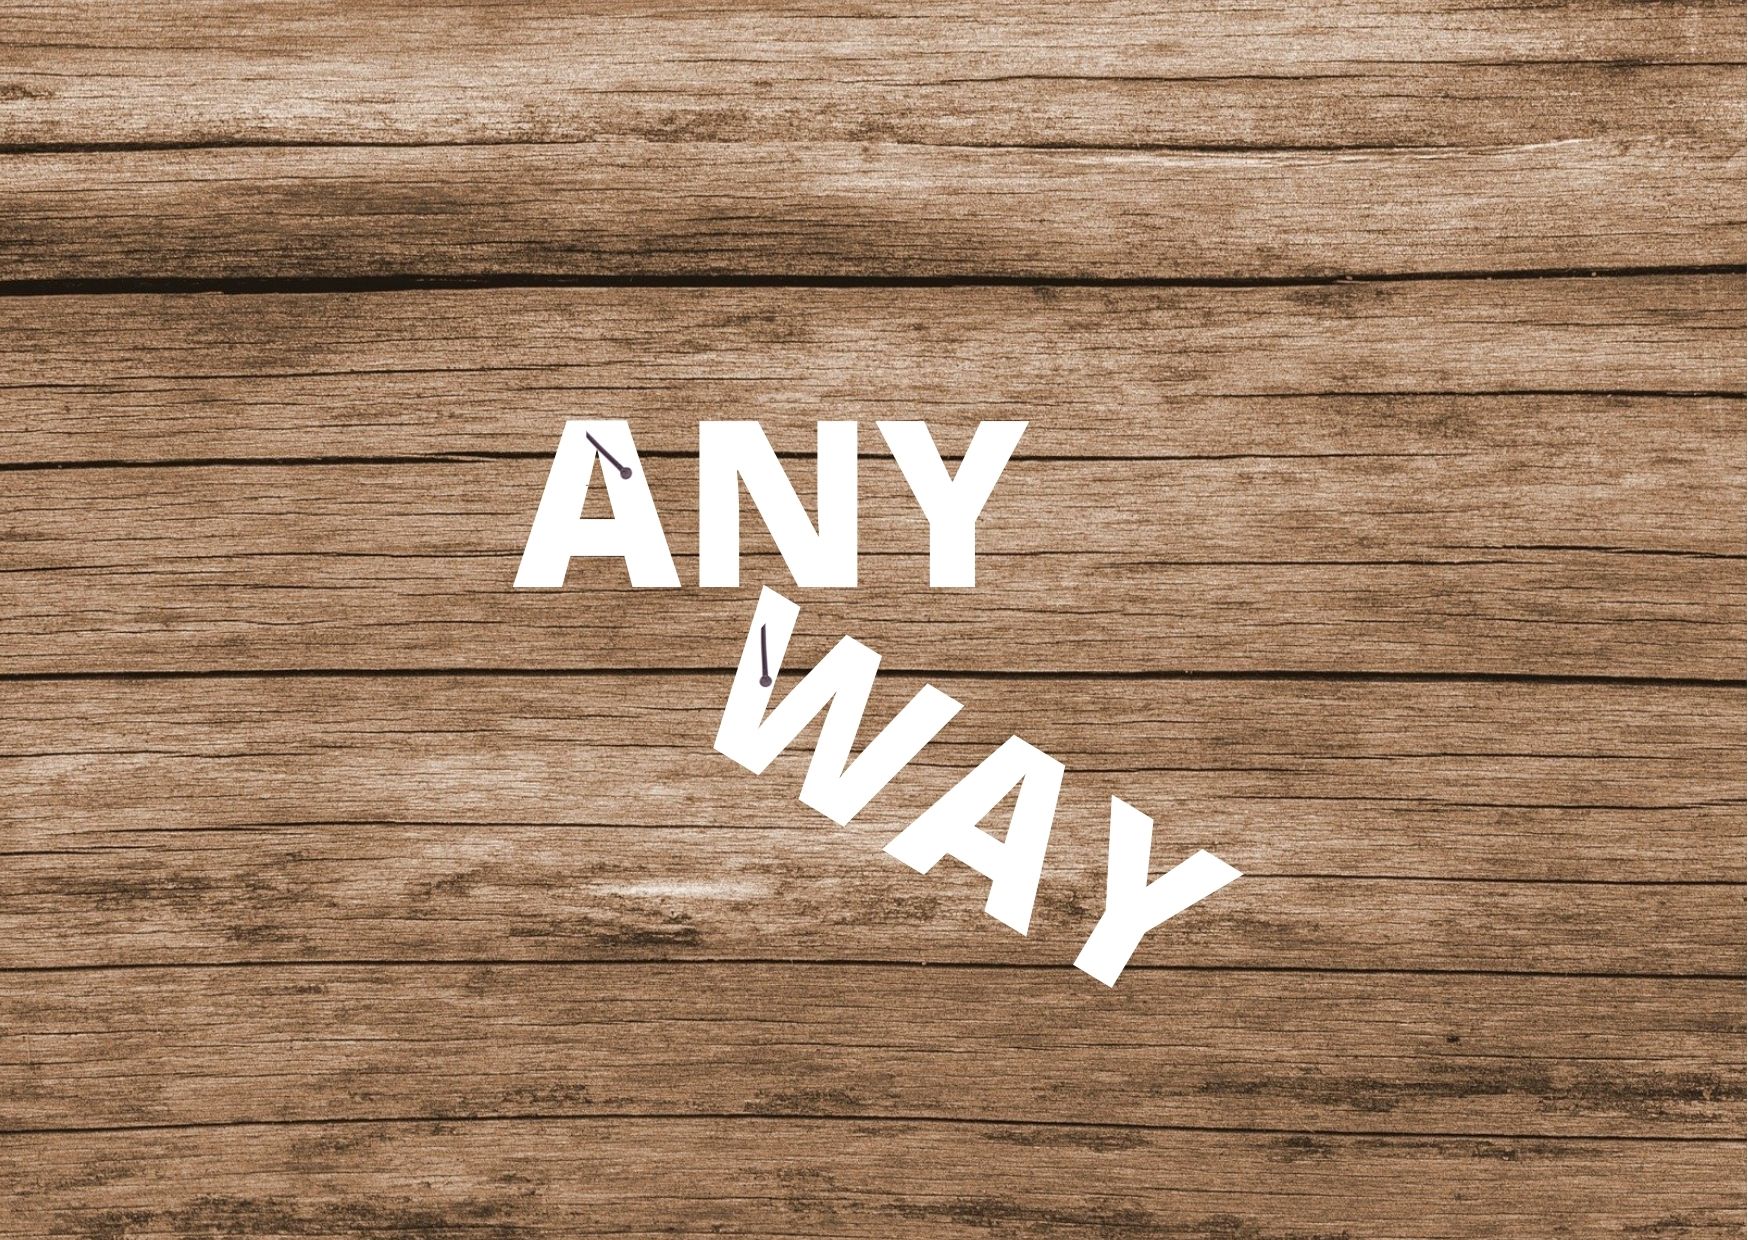 Any way or anyway